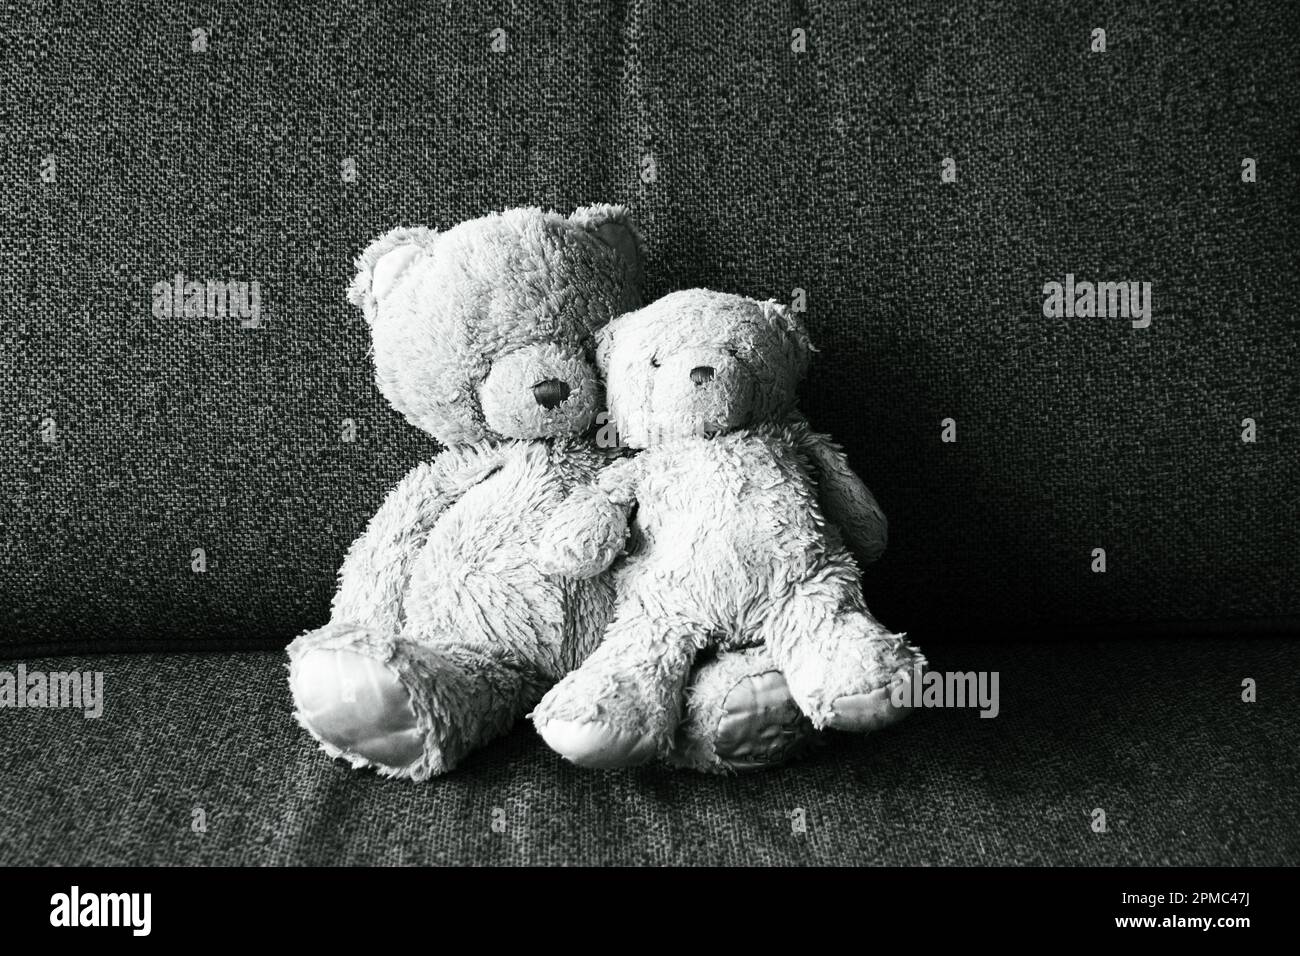 Two fuzzy well-loved teddy bears siting on a textured couch. Stock Photo